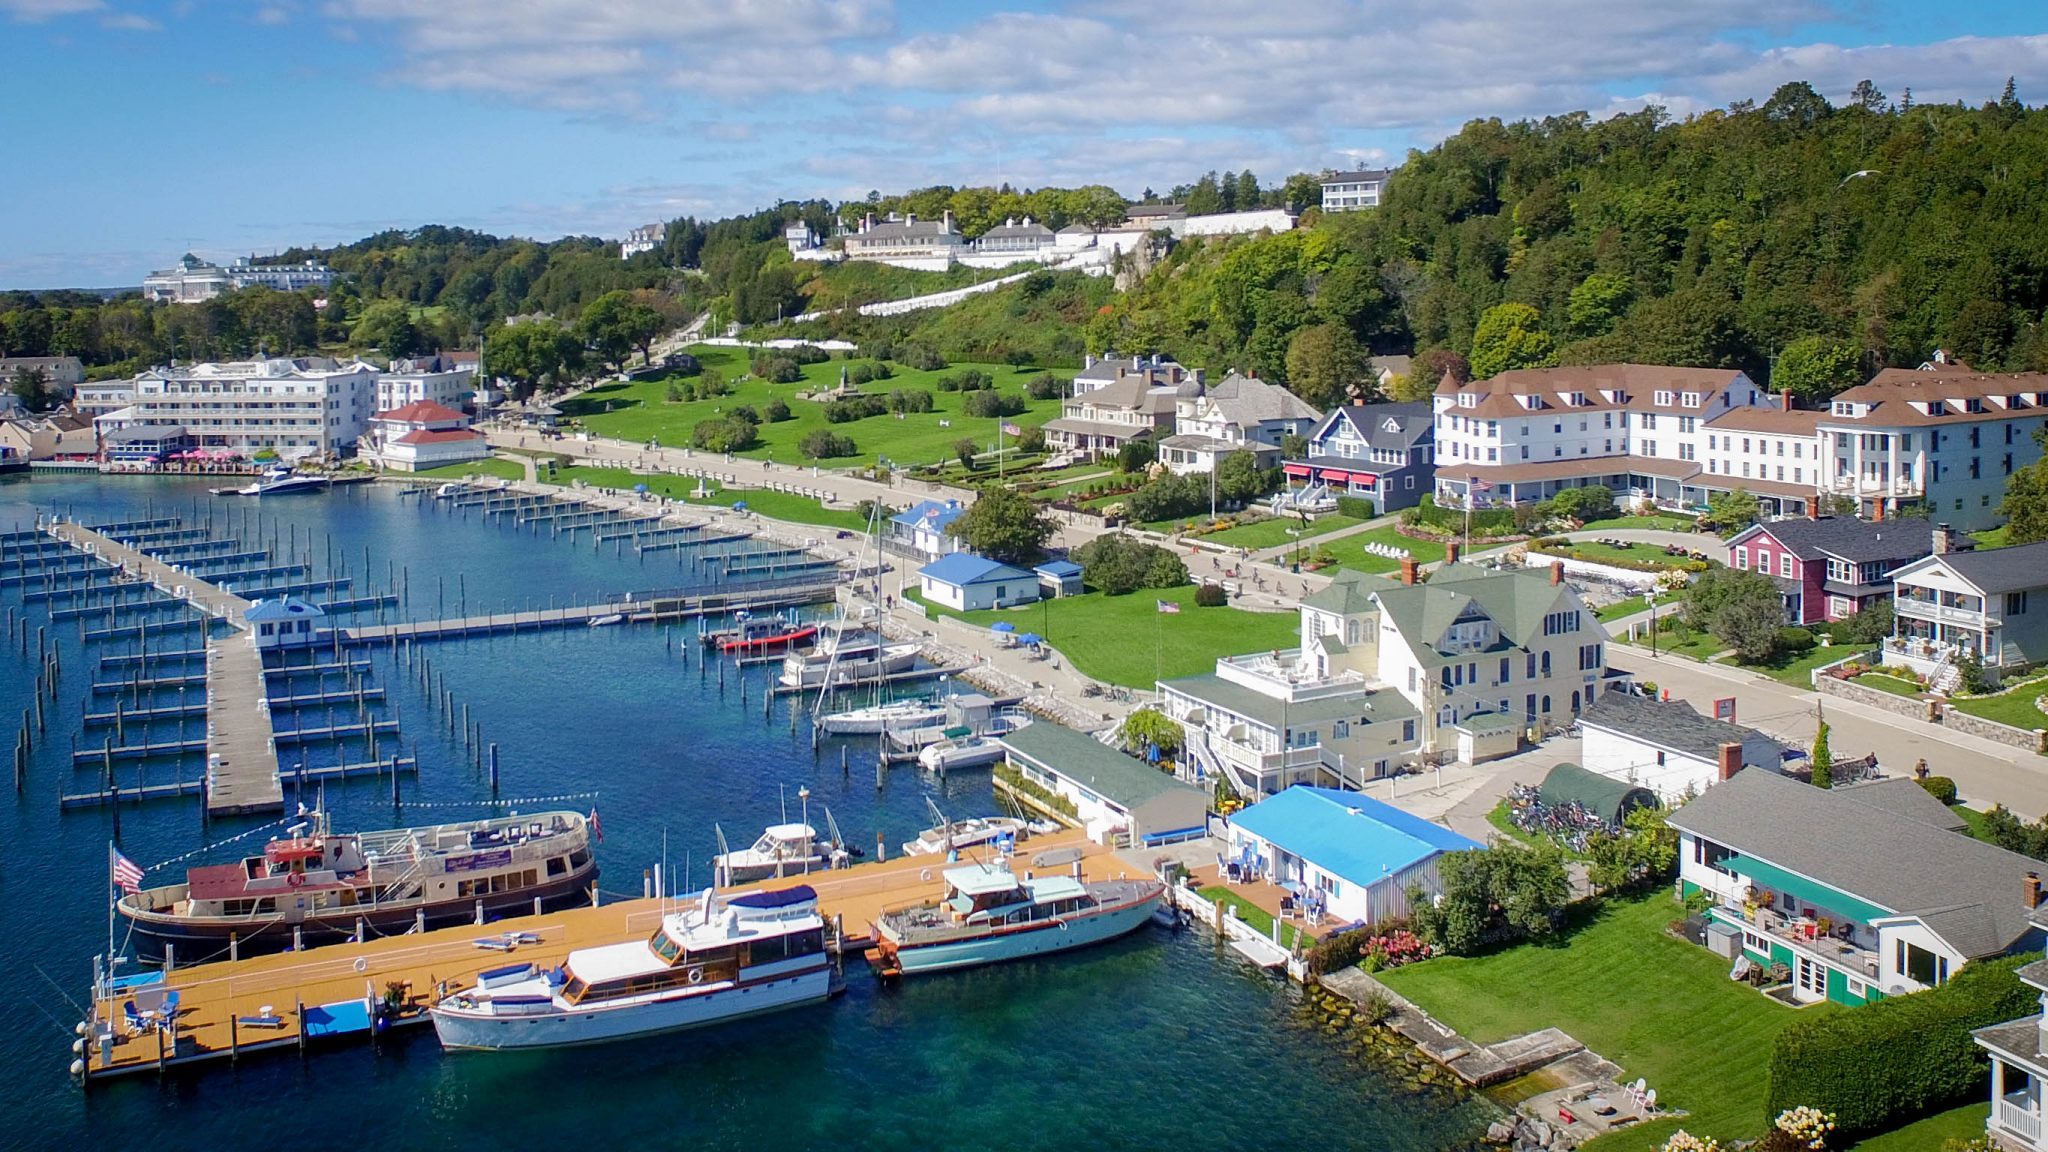 Special permission is needed to operate a drone on Mackinac Island, which is beautiful to see from above. 